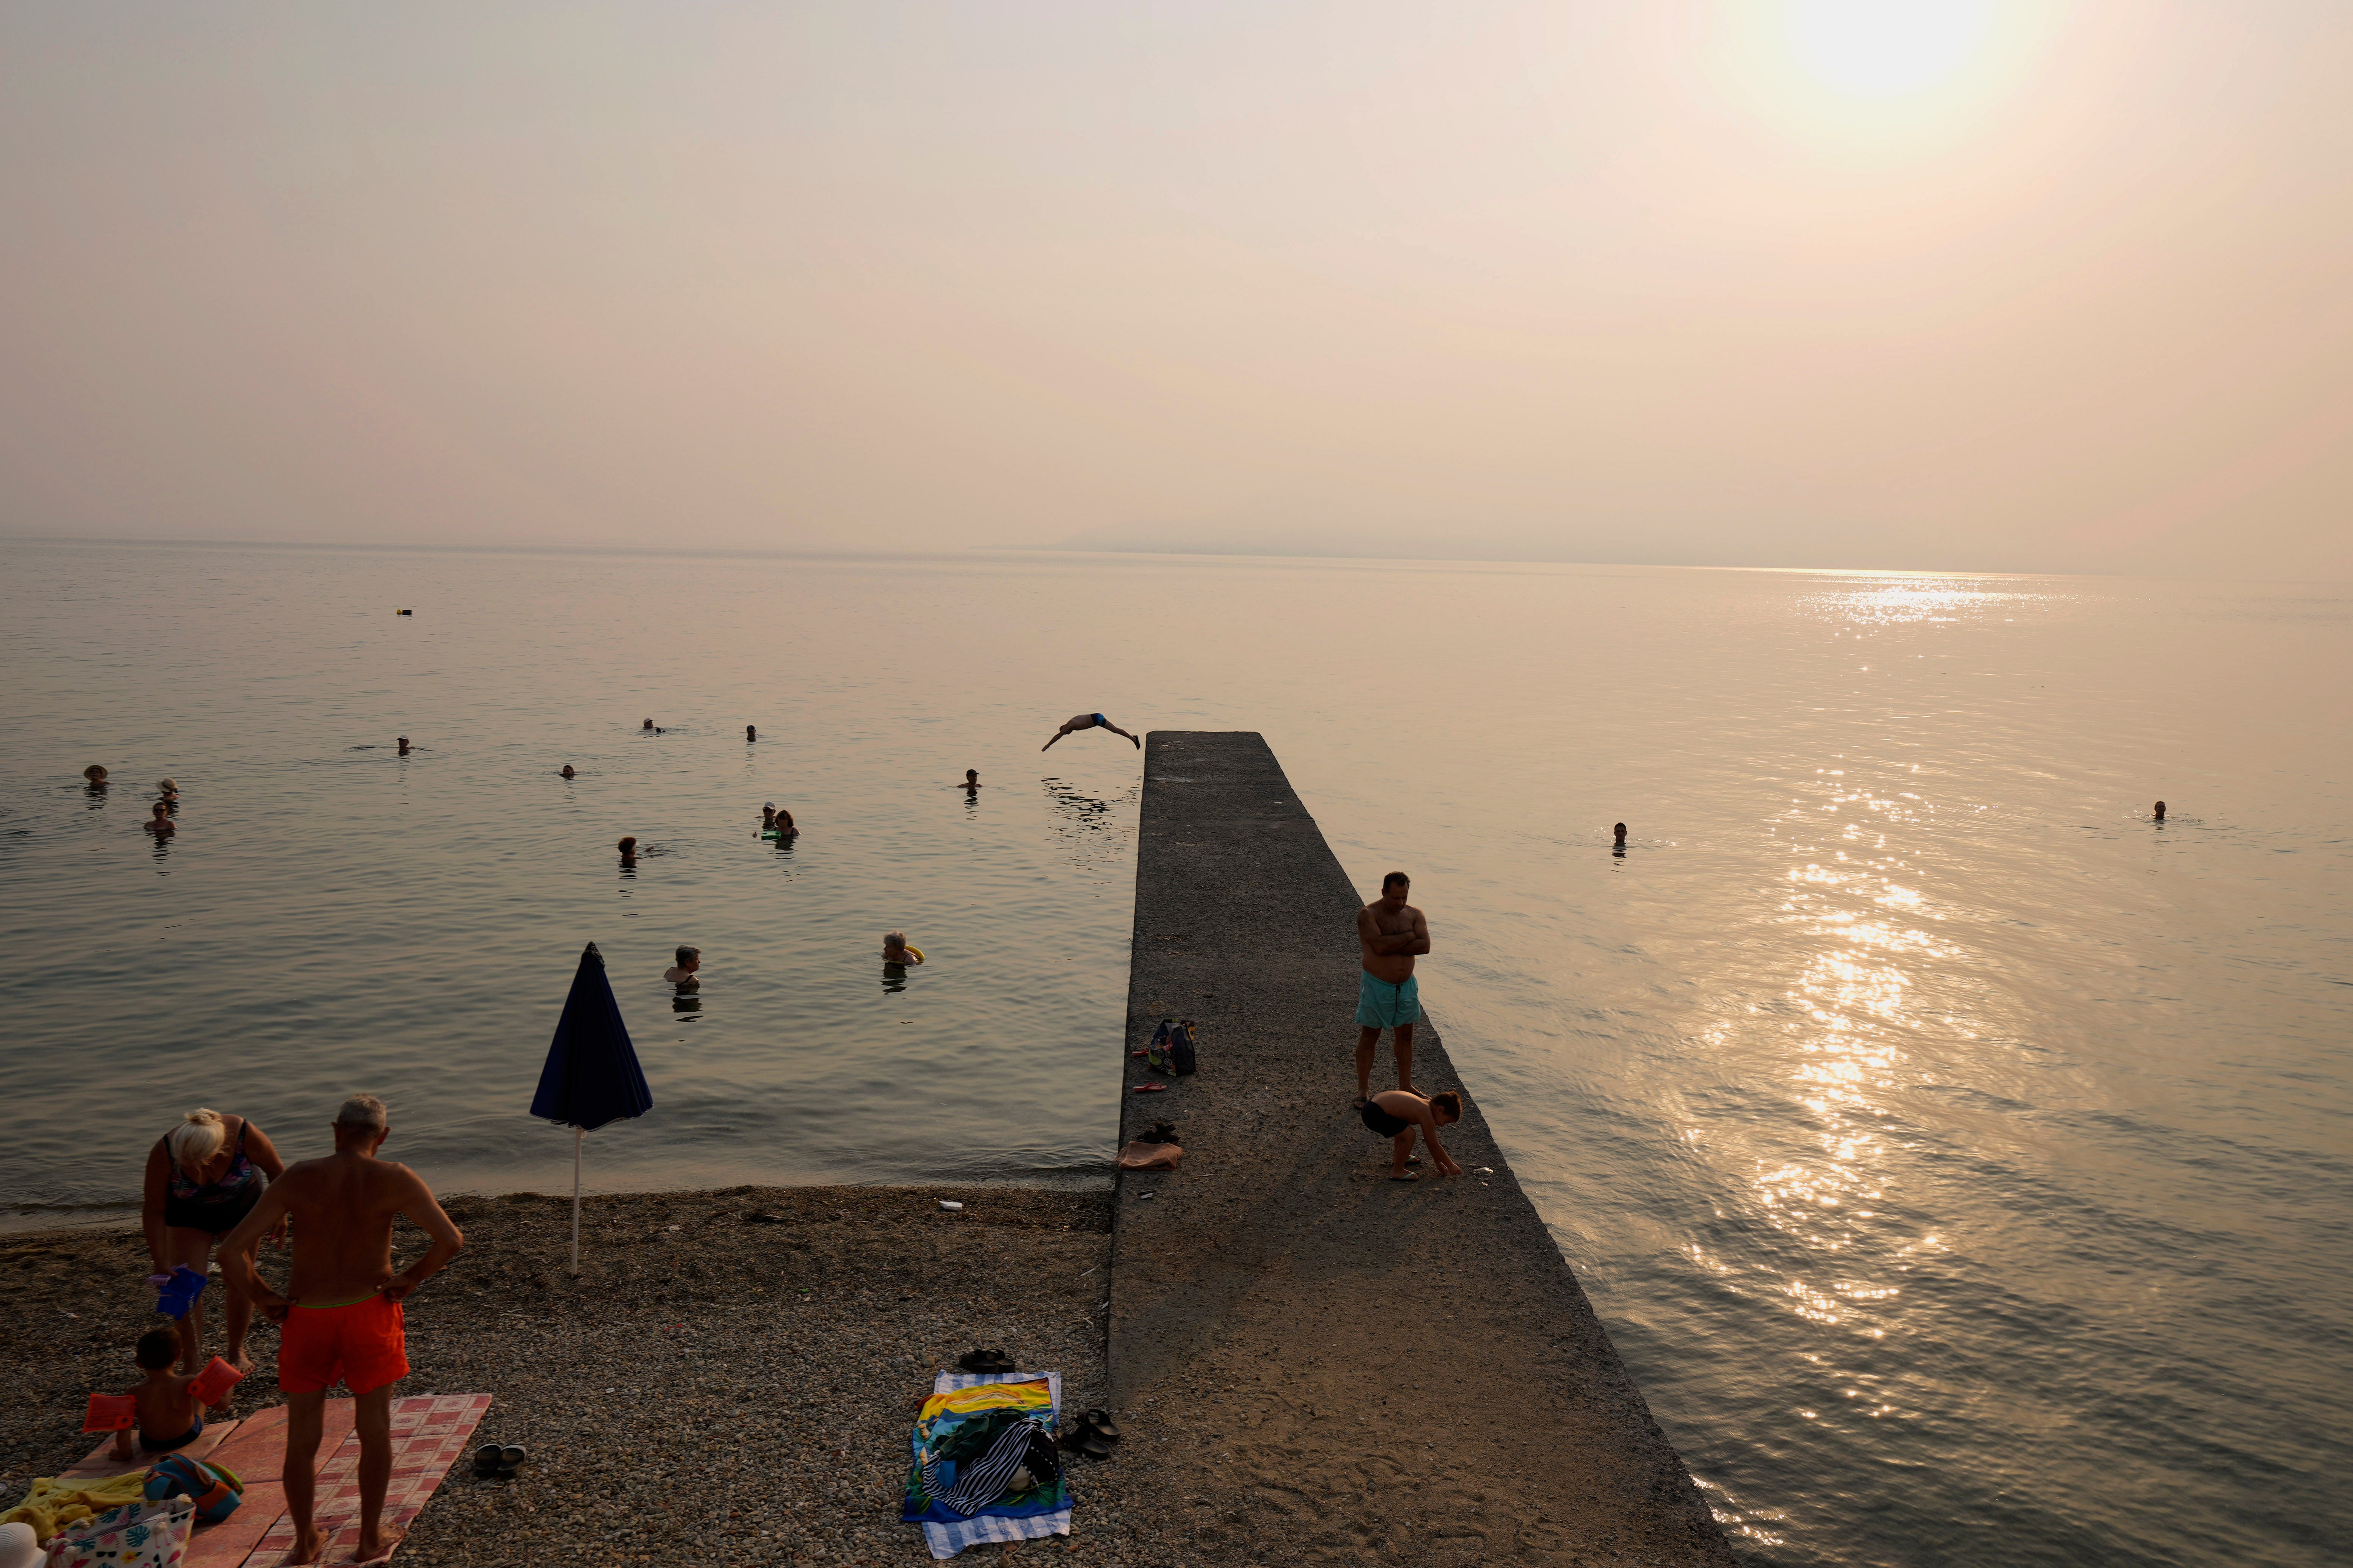 Smoke from the wildfires spreads over people as they enjoy the sea at Edipsos on Evia island